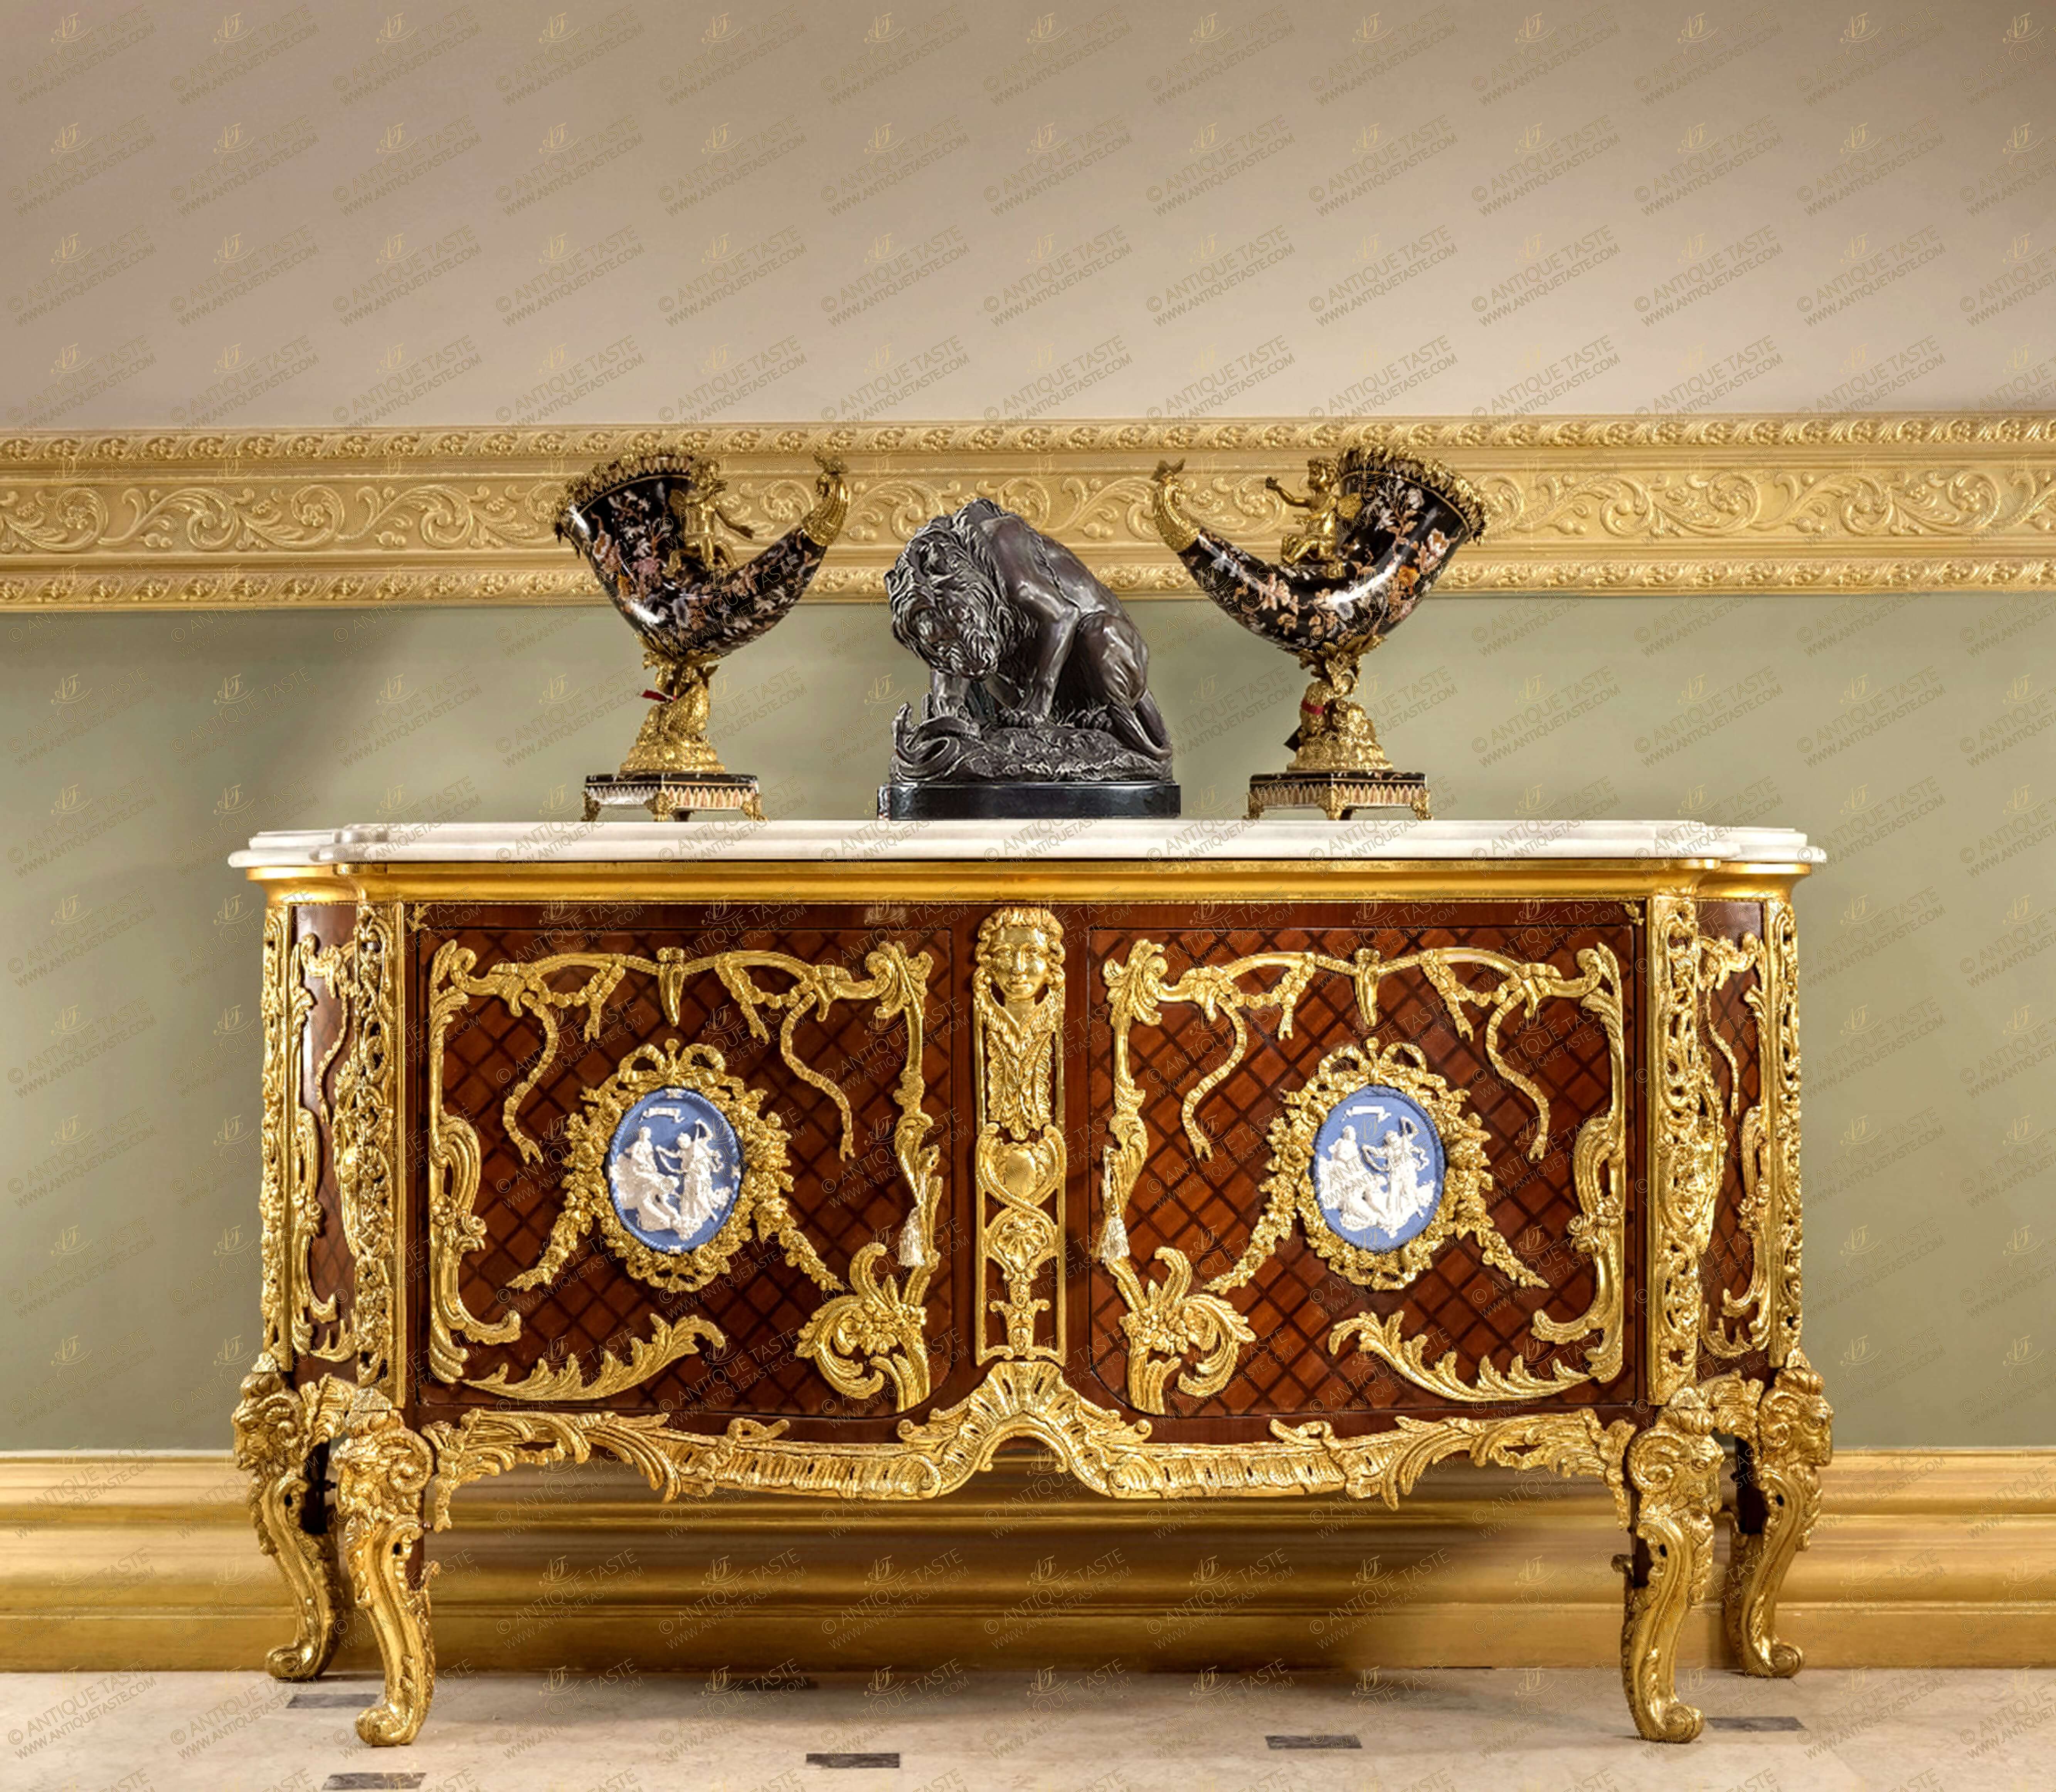 A French late 19th century Louis XV style gilt-ormolu-mounted and veneer parquetry inlaid commode a vantaux after the model Commode Médaillier designed by the Slodtz brothers and executed by Antoine-Robert Gaudreaux, made for le cabinet du Roi at Versailles with a serpentine veined moulded marble top above a pair of doors with one tier inside, each door centered by an ormolu oval one with a cherub and goat, the other oval with Ariadne on a leopard, all within marvelously chiseled  ribbon-tied acanthus leaves and blossoming flower swaging  garlands, all on a diamond parquetry ground veneer inlay centered by an ormolu female mask on scrolling ormolu works and shell on a very fine ormolu scalloped shell form apron with acanthus leaves scrolls, the sides each with a further similar oval medallion within the same ormolu tied scrolling frame, and raised on astonishingly chiseled and burnished ormolu cabriole legs with scrolled ram-headed capitals, The original precious commode-médaillier was designed and created in 1739 for the king's use in Louis XV's Cabinet à Pans at Versailles. It is now in the Cabinet des Médailles at the Bibliothèque Nationale, This commode is based on the famous kingwood medal cabinet supplied by the Royal cabinet-maker Antoine-Robert Gaudreaus (1682-1746) on 10 January 1739 for the Cabinet Interieur. It was referred to at the time as 'Par les Srs Gaudreaux ébéniste et Slodtz frères, sculpteurs, pour servir dans le cabinet aux tableaux avant la petite galerie à Versailles '. The bronze mounts were modelled by the Slodtz brothers. The commode was a popular model amongst Parisian makers during the second half of the 19th century and many variants of it were made